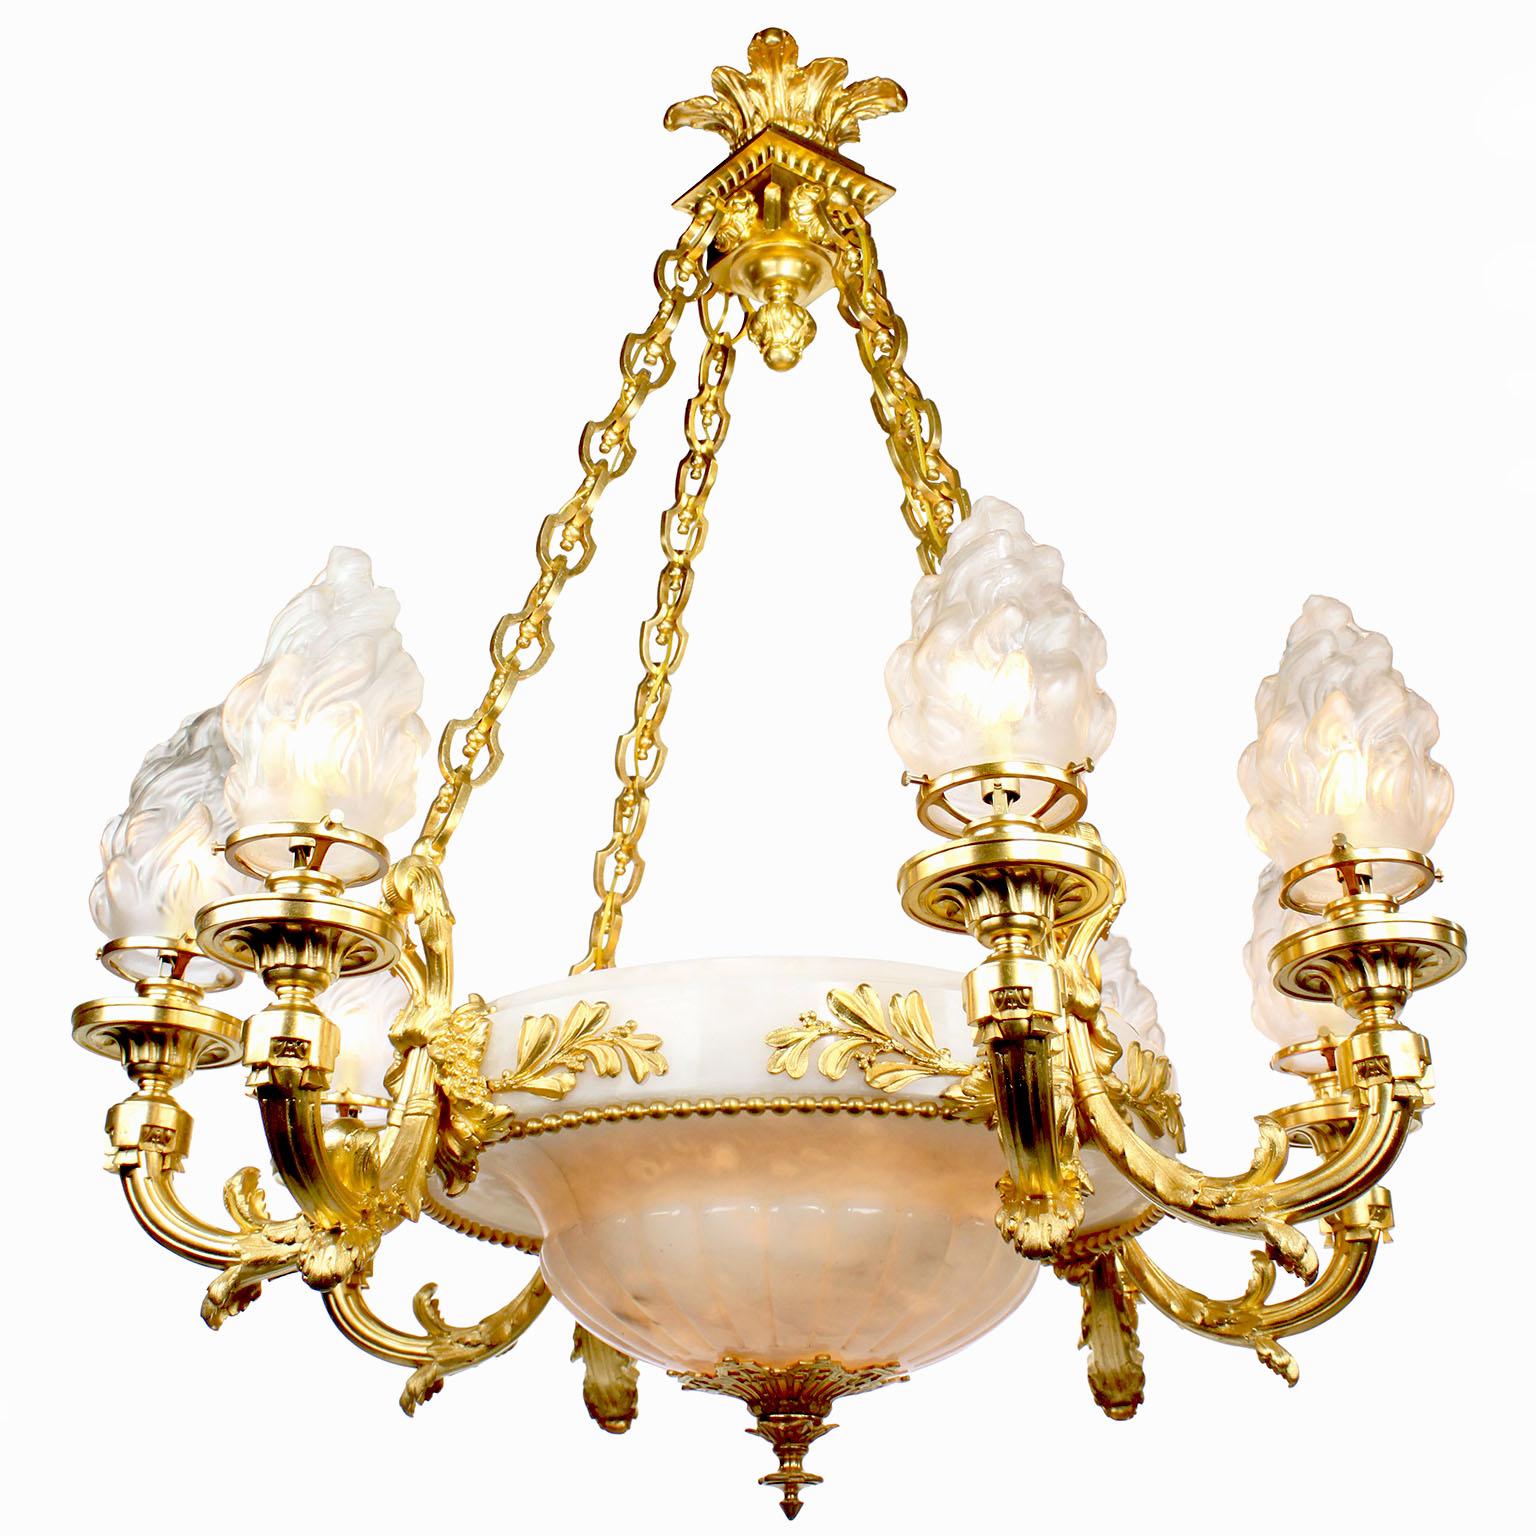 A very fine and Rare 19th century Franco-Russian neoclassical revival style ormolu mounted white alabaster eight-light chandelier, possibly a design by Félix Chopin (French, 1813-1892). The ovoid carved alabaster plafonnier bowl, fitted with an